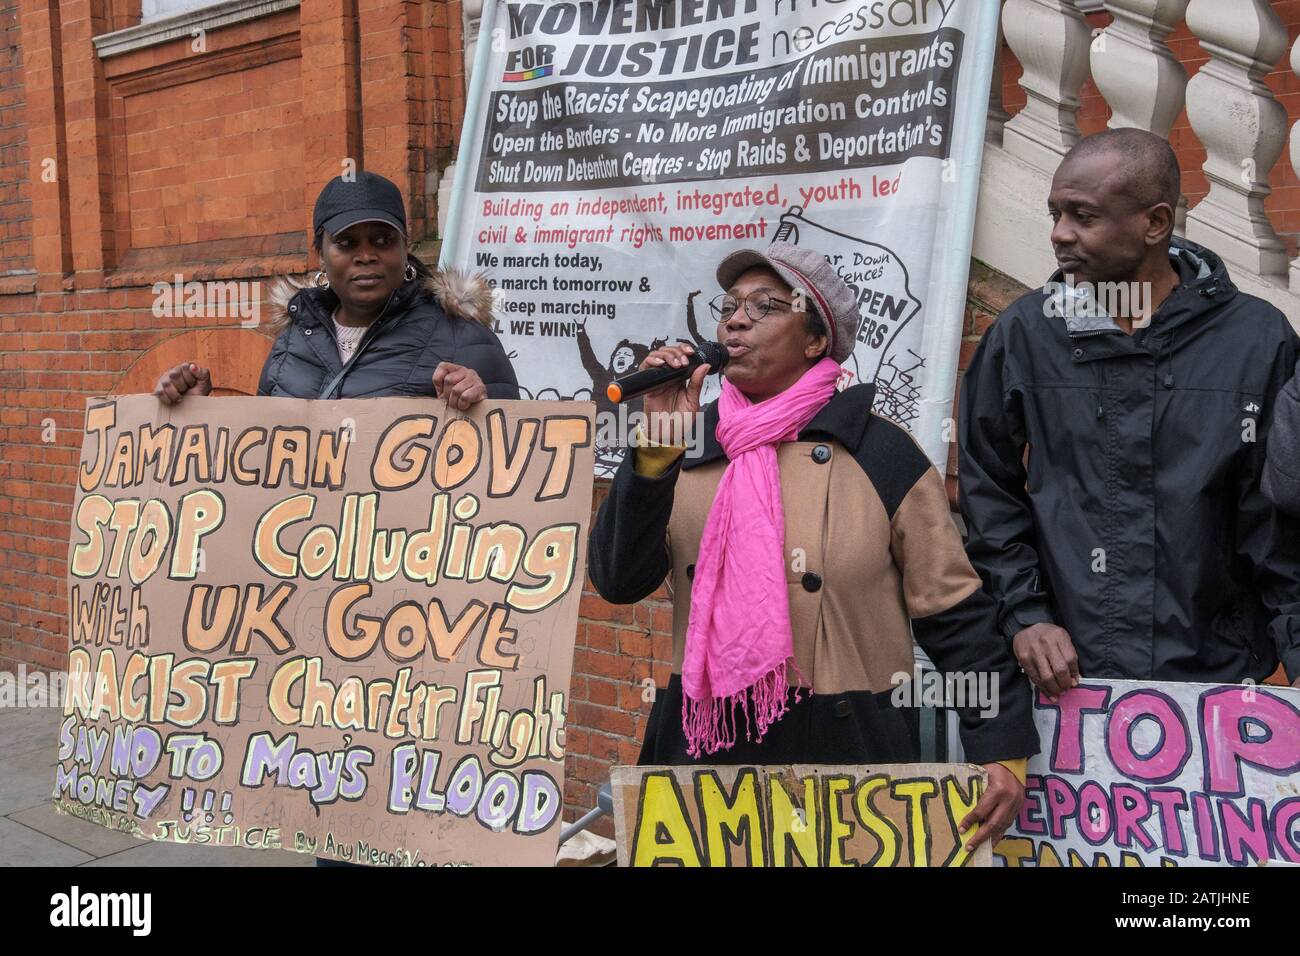 London, UK. 3rd February 2020. A black woman speaks at the Movement for Justice protest outside the Jamaican High Commission demanding Jamaica end accepting Britain's racist deportation flights. They say these are a modern equivalent of slave ships, with deportees manacled between guards for the flight. Those seized include many from Windrush families who have lived here most of their lives but are unable to produce the exhaustive paperwork demanded and seldom have the chance to properly contest their case. Peter Marshall/Alamy Live News Stock Photo